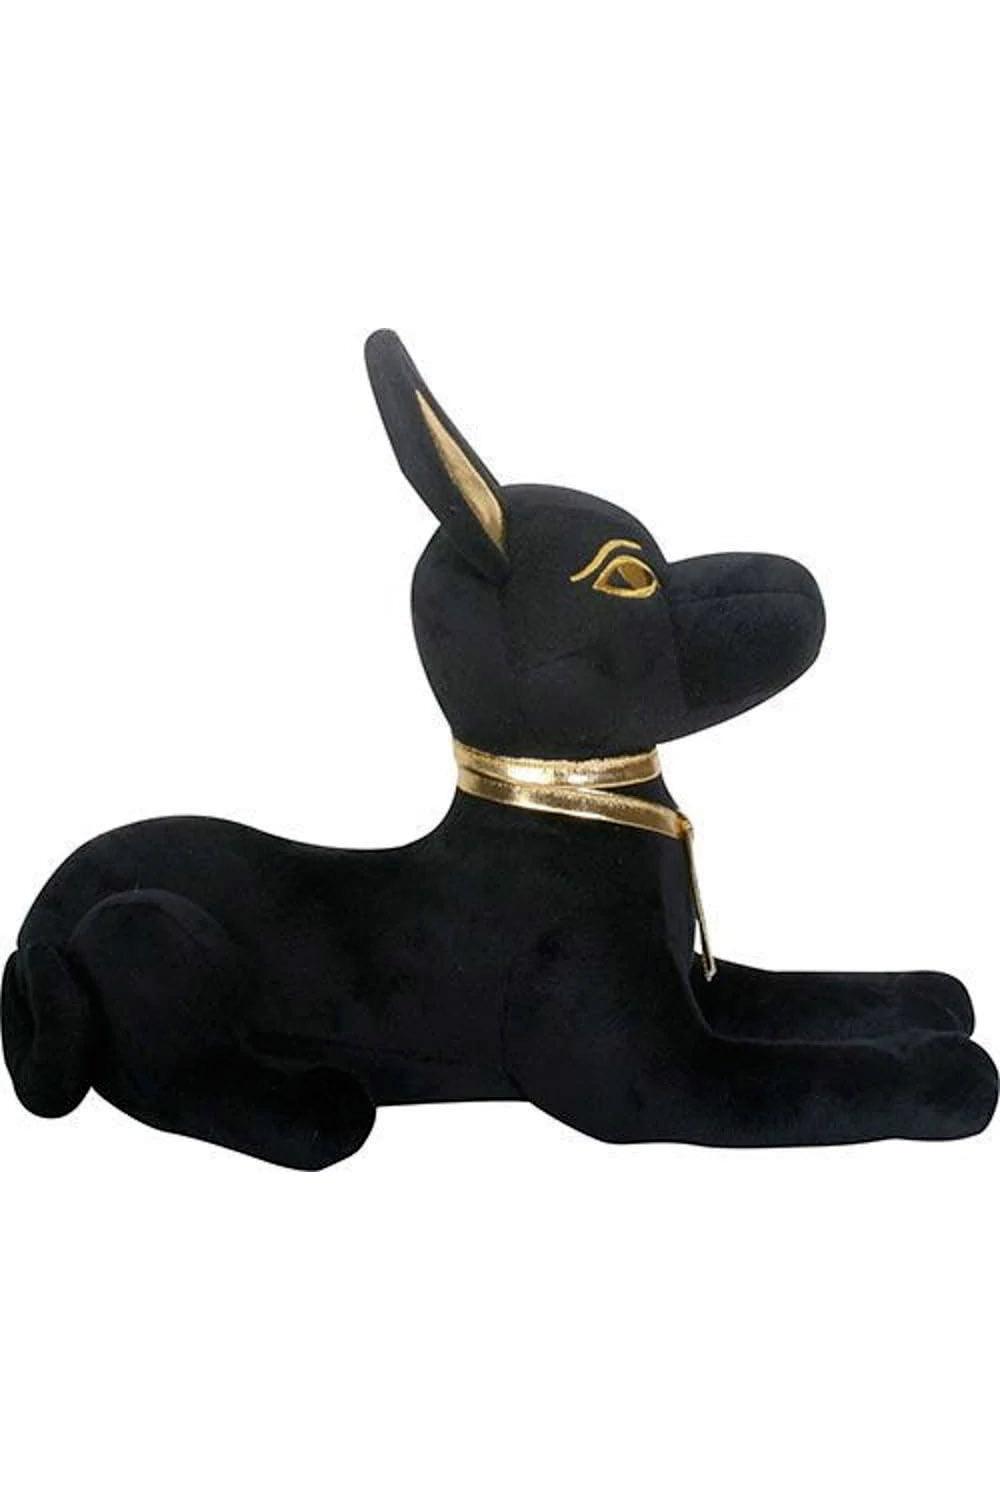 Pacific Giftware Anubis Plush [Small] - VampireFreaks